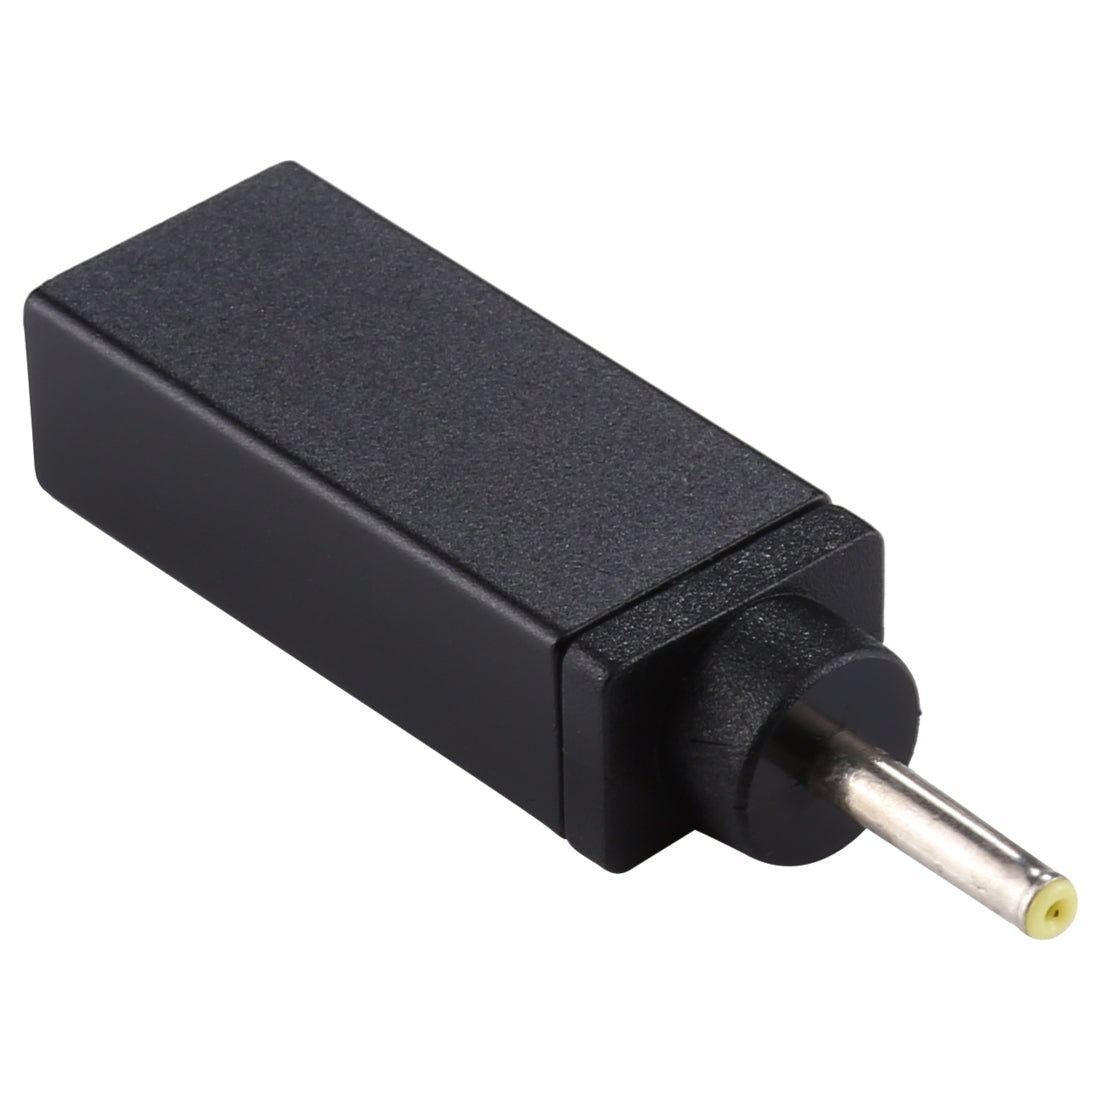 PD 18.5V-20V 2.5x0.7mm Male Adapter Connector